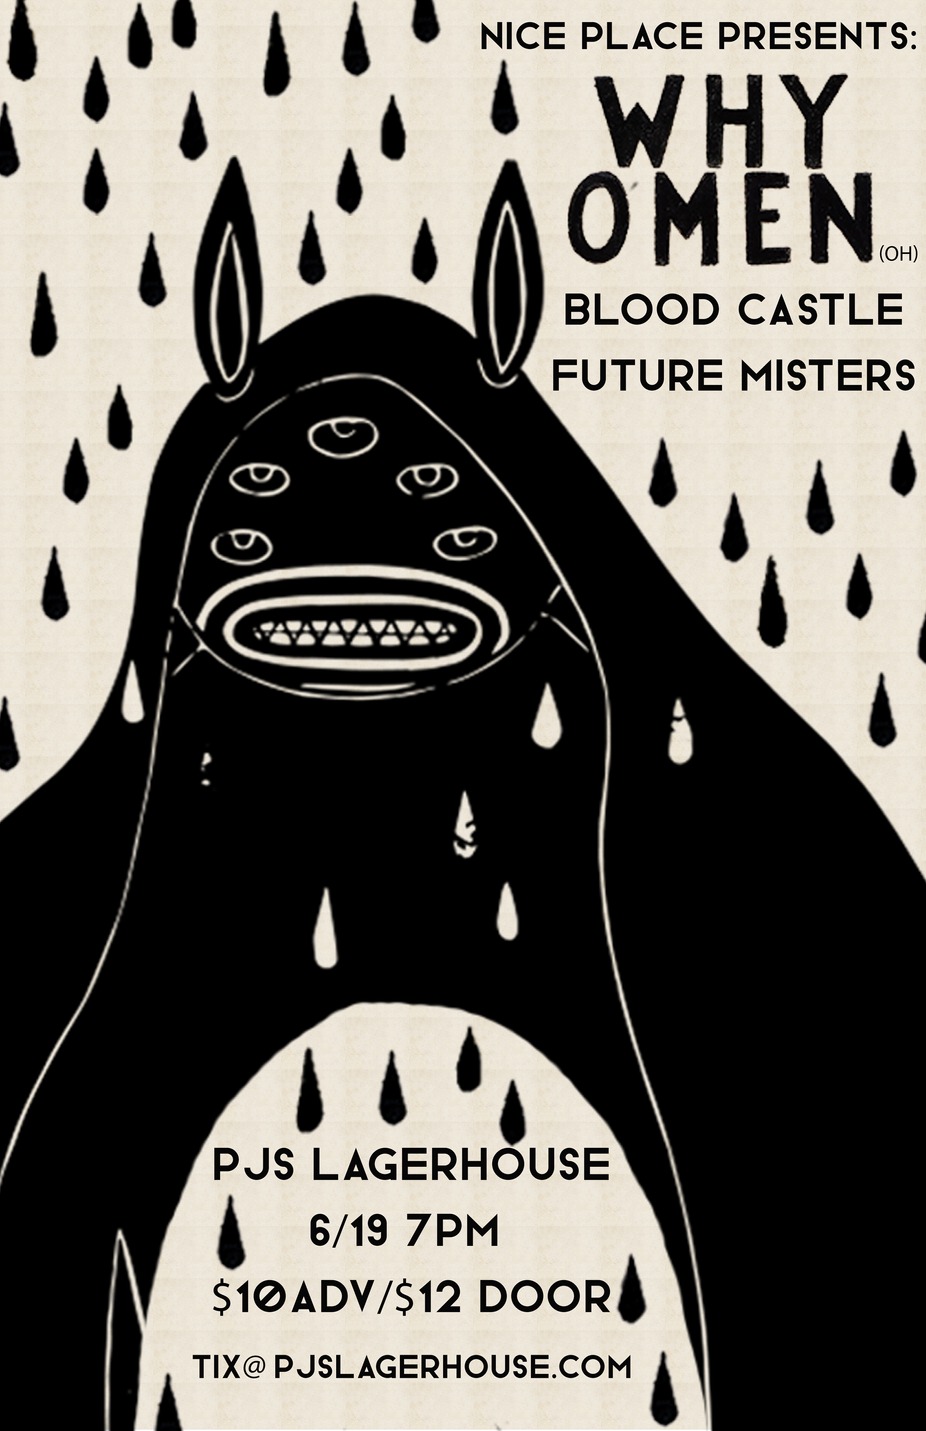 Nice Place Presents: Why Omen (OH), Blood Castle, Future Misters event photo